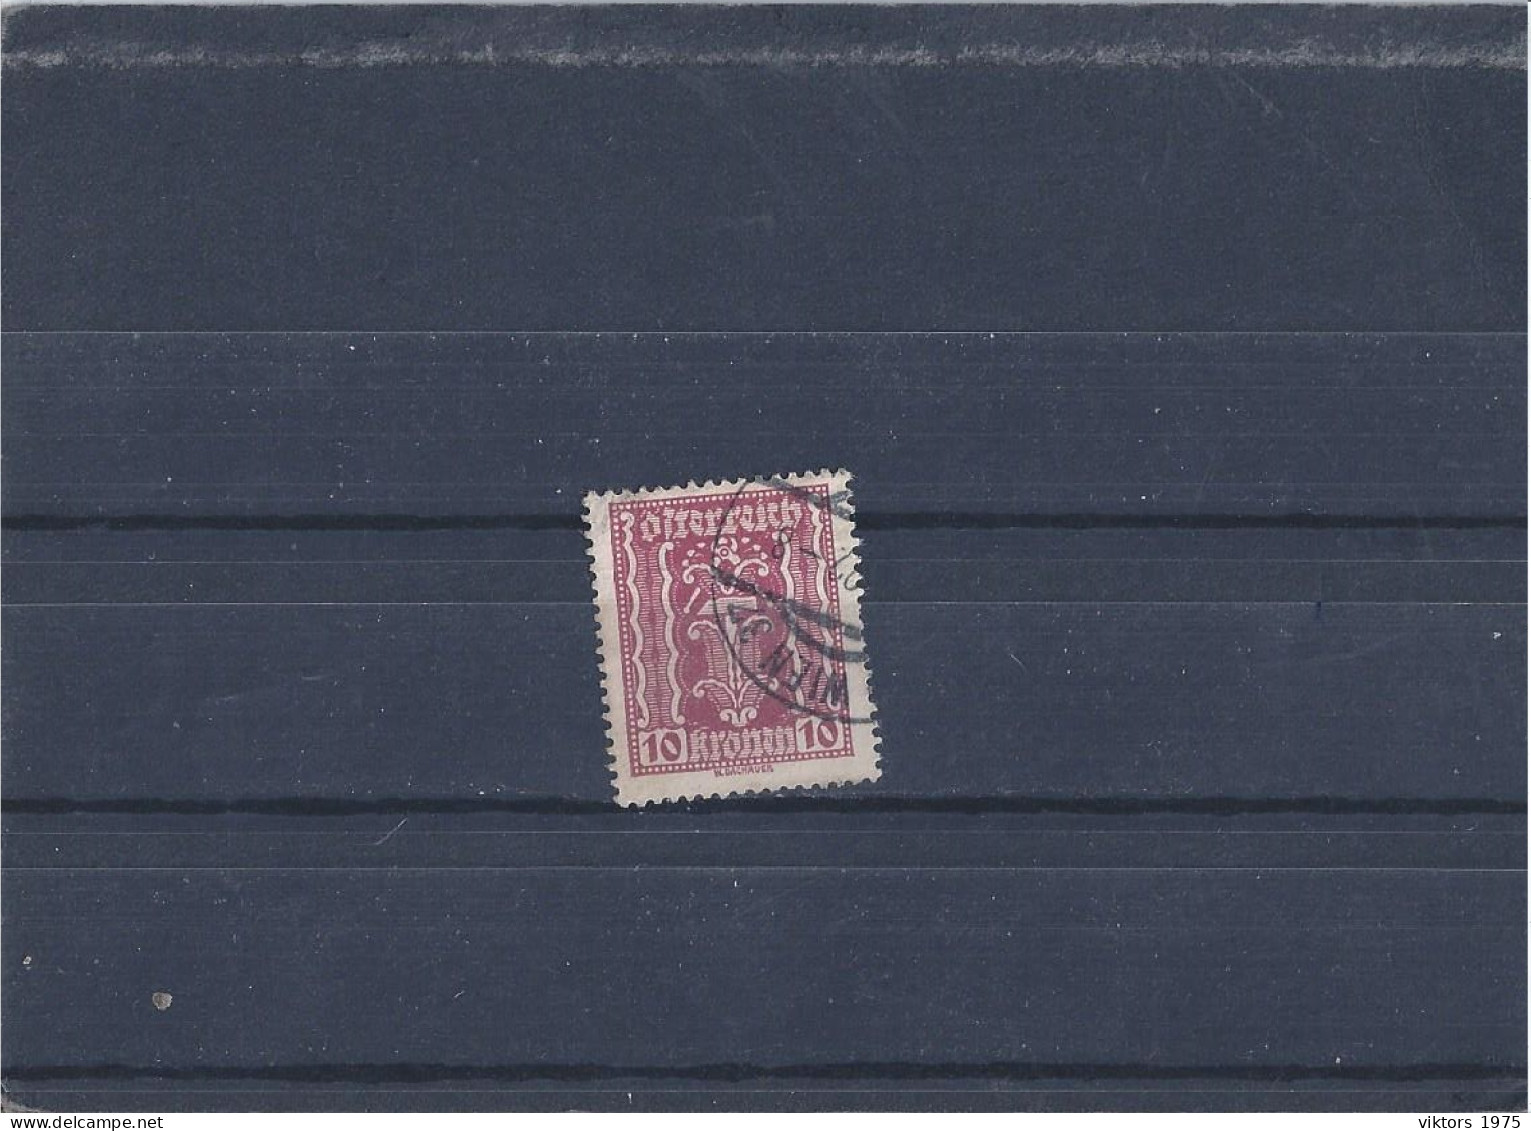 Used Stamp Nr.367 In MICHEL Catalog - Used Stamps